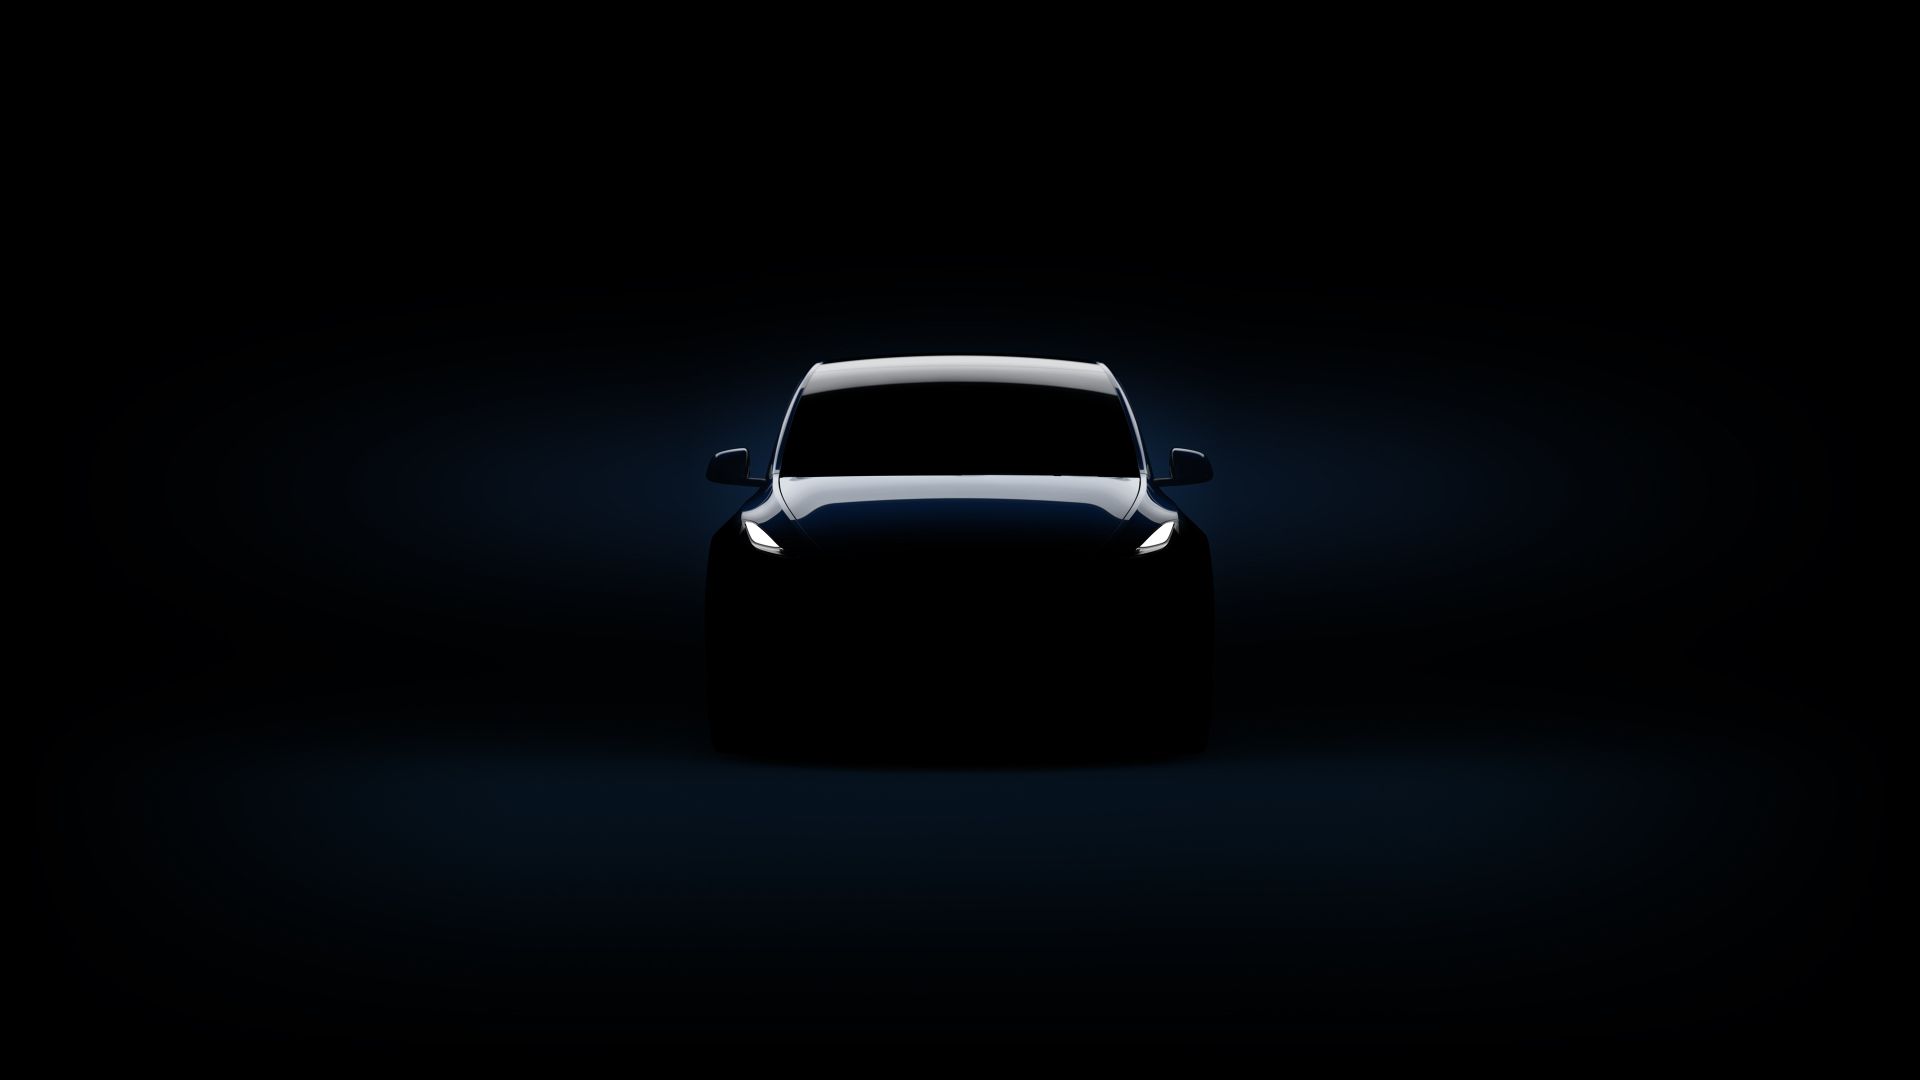 Tesla Model Y owners can use Siri to open and close tailgate - CnEVPost